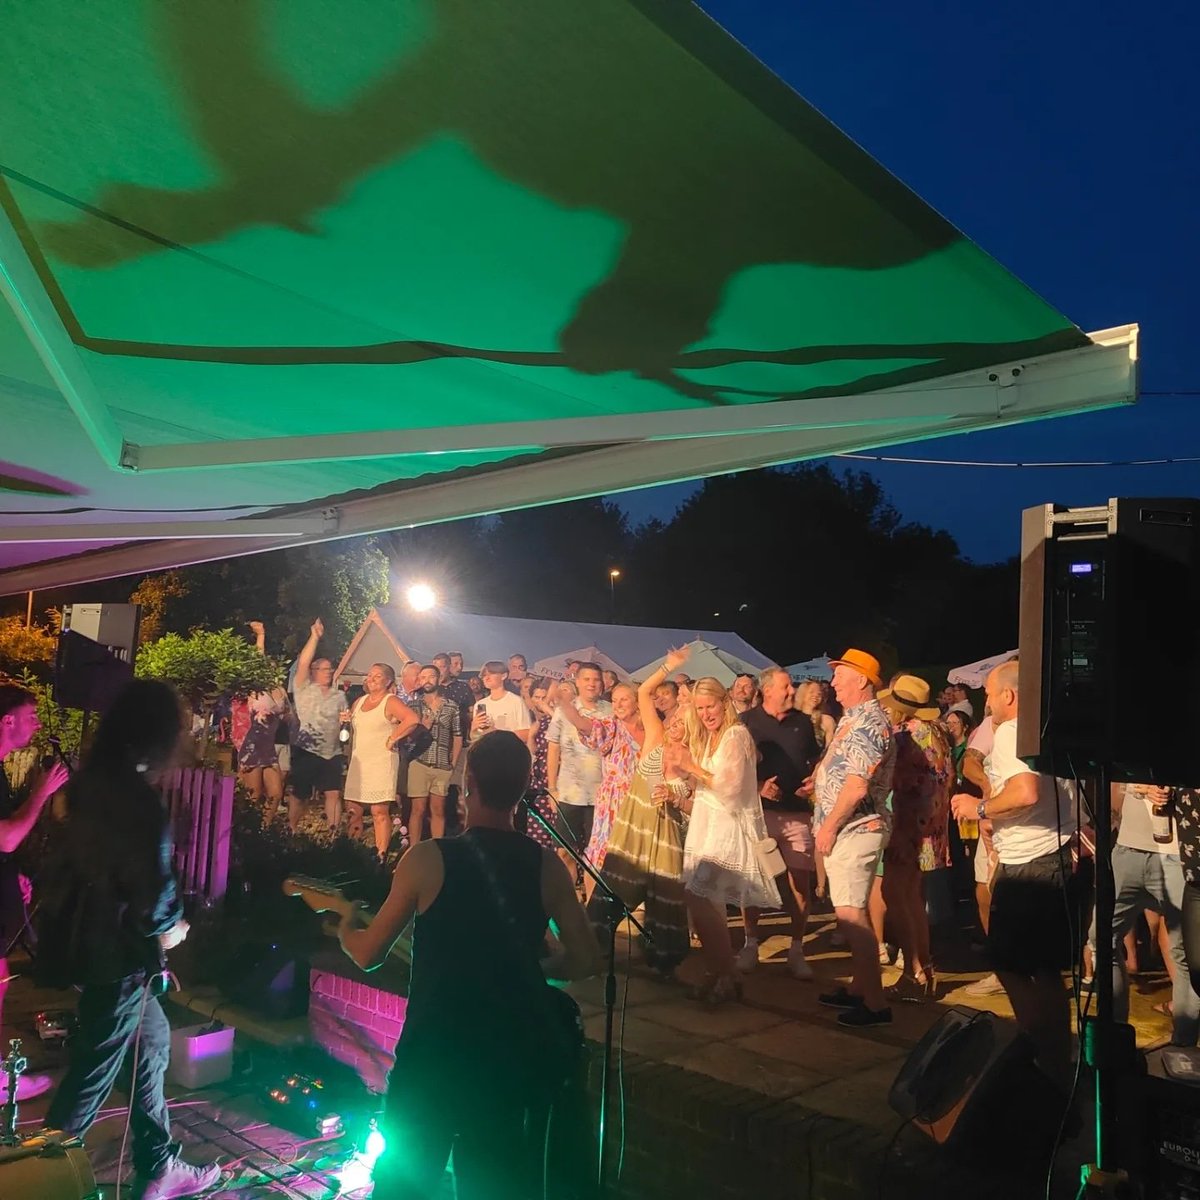 Dreaming of nights like this....

Don't worry it won't be long till live music is back! June 8th for our After Fete Party 🥳 

#LiveMusic #Music #AfterFeteParty #PubEvents #HampshireBlogger #BasingstokeBlogger #MusicNight